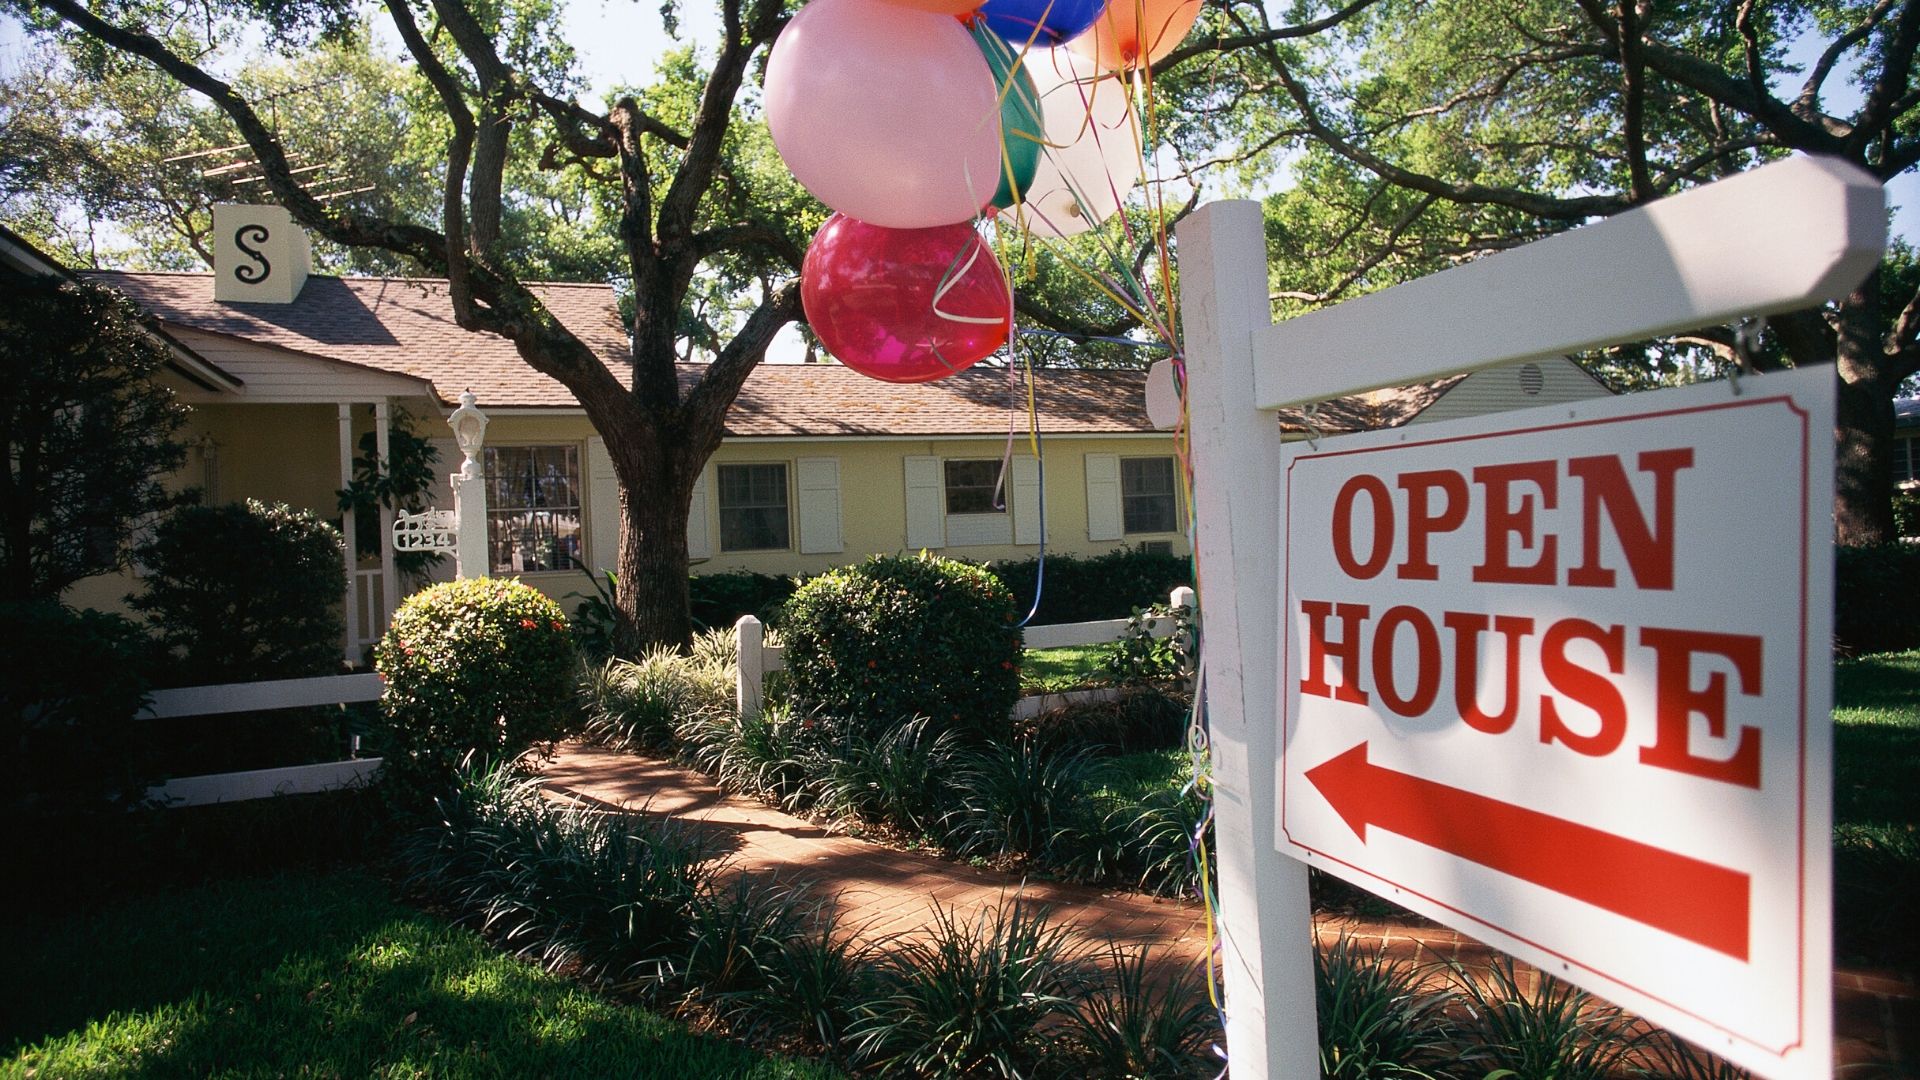 Selling Your Home On Long Island? Here Are A Few Important Open House Tips